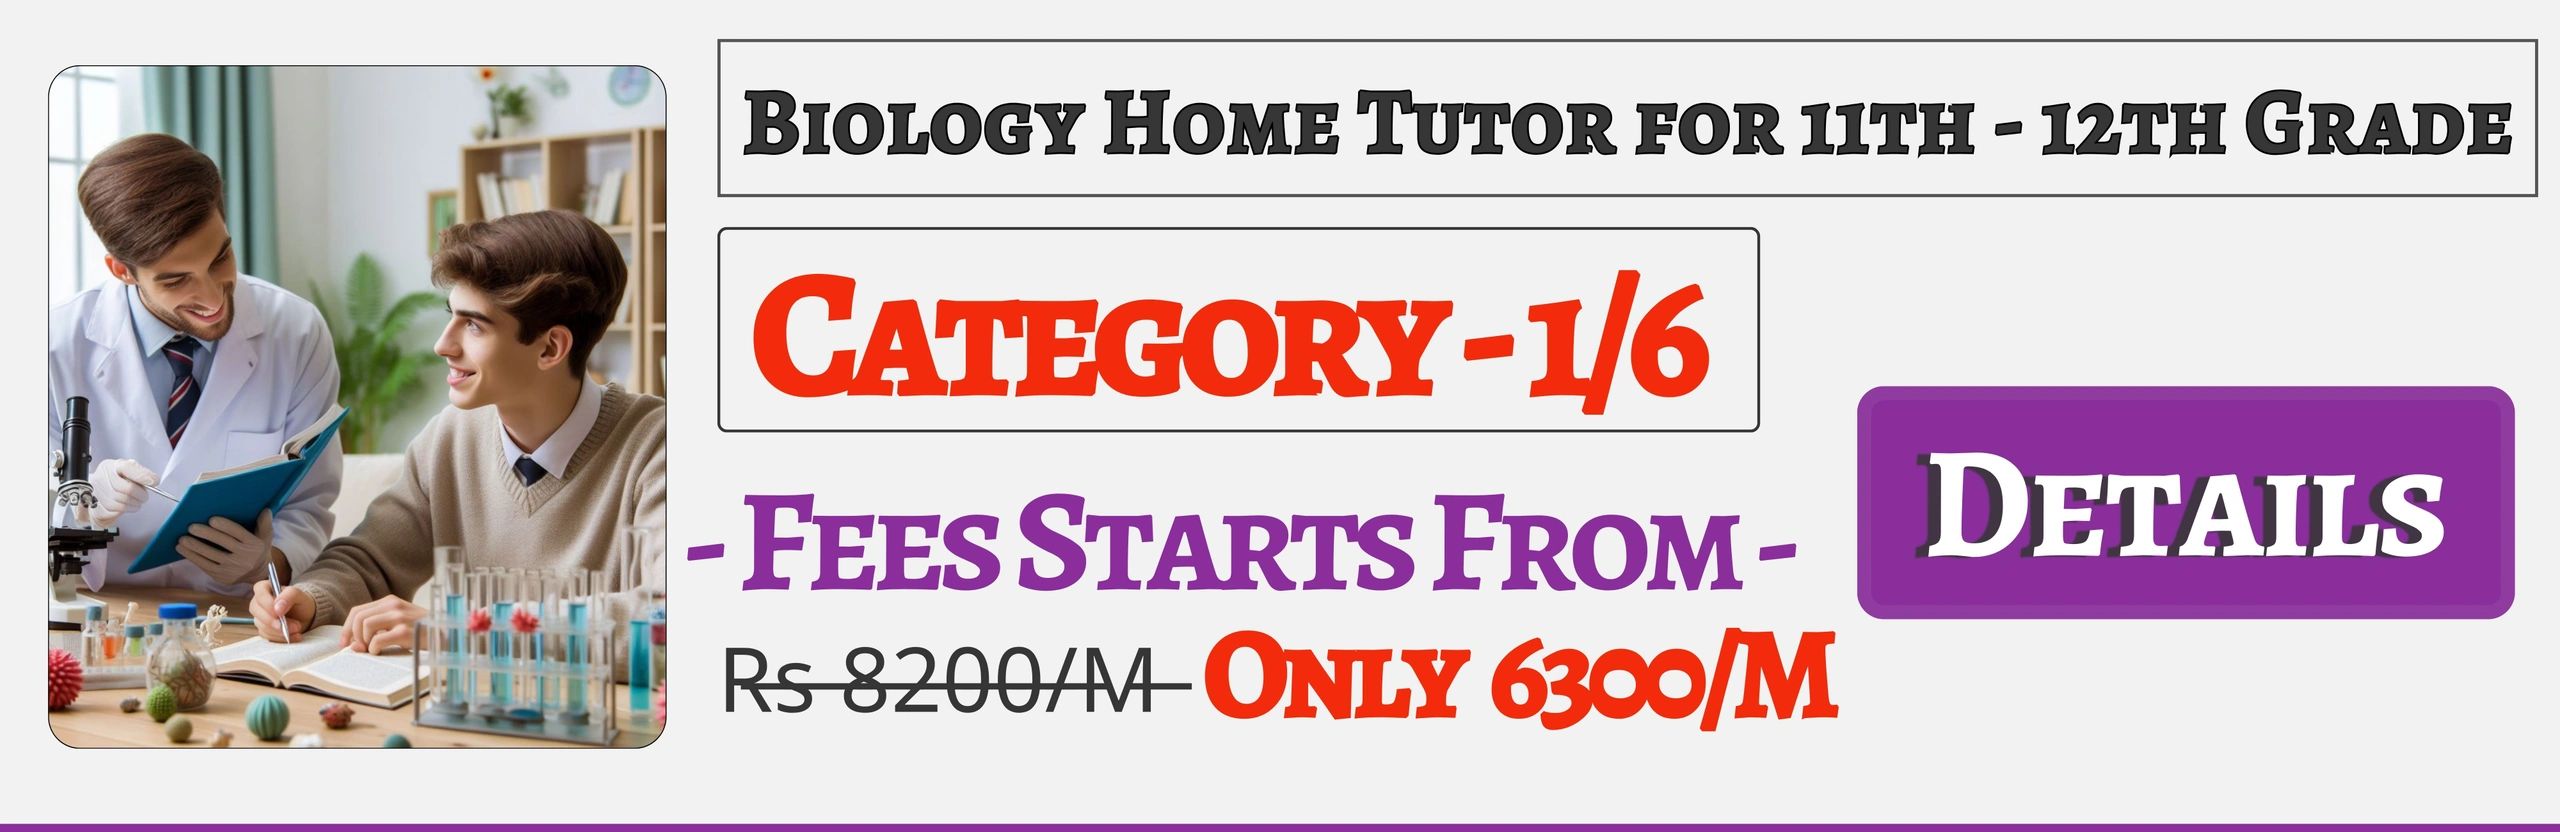 Book Best Nearby Biology Home Tuition Tutors For 11th & 12th In Jaipur , Fees Only 6300/M